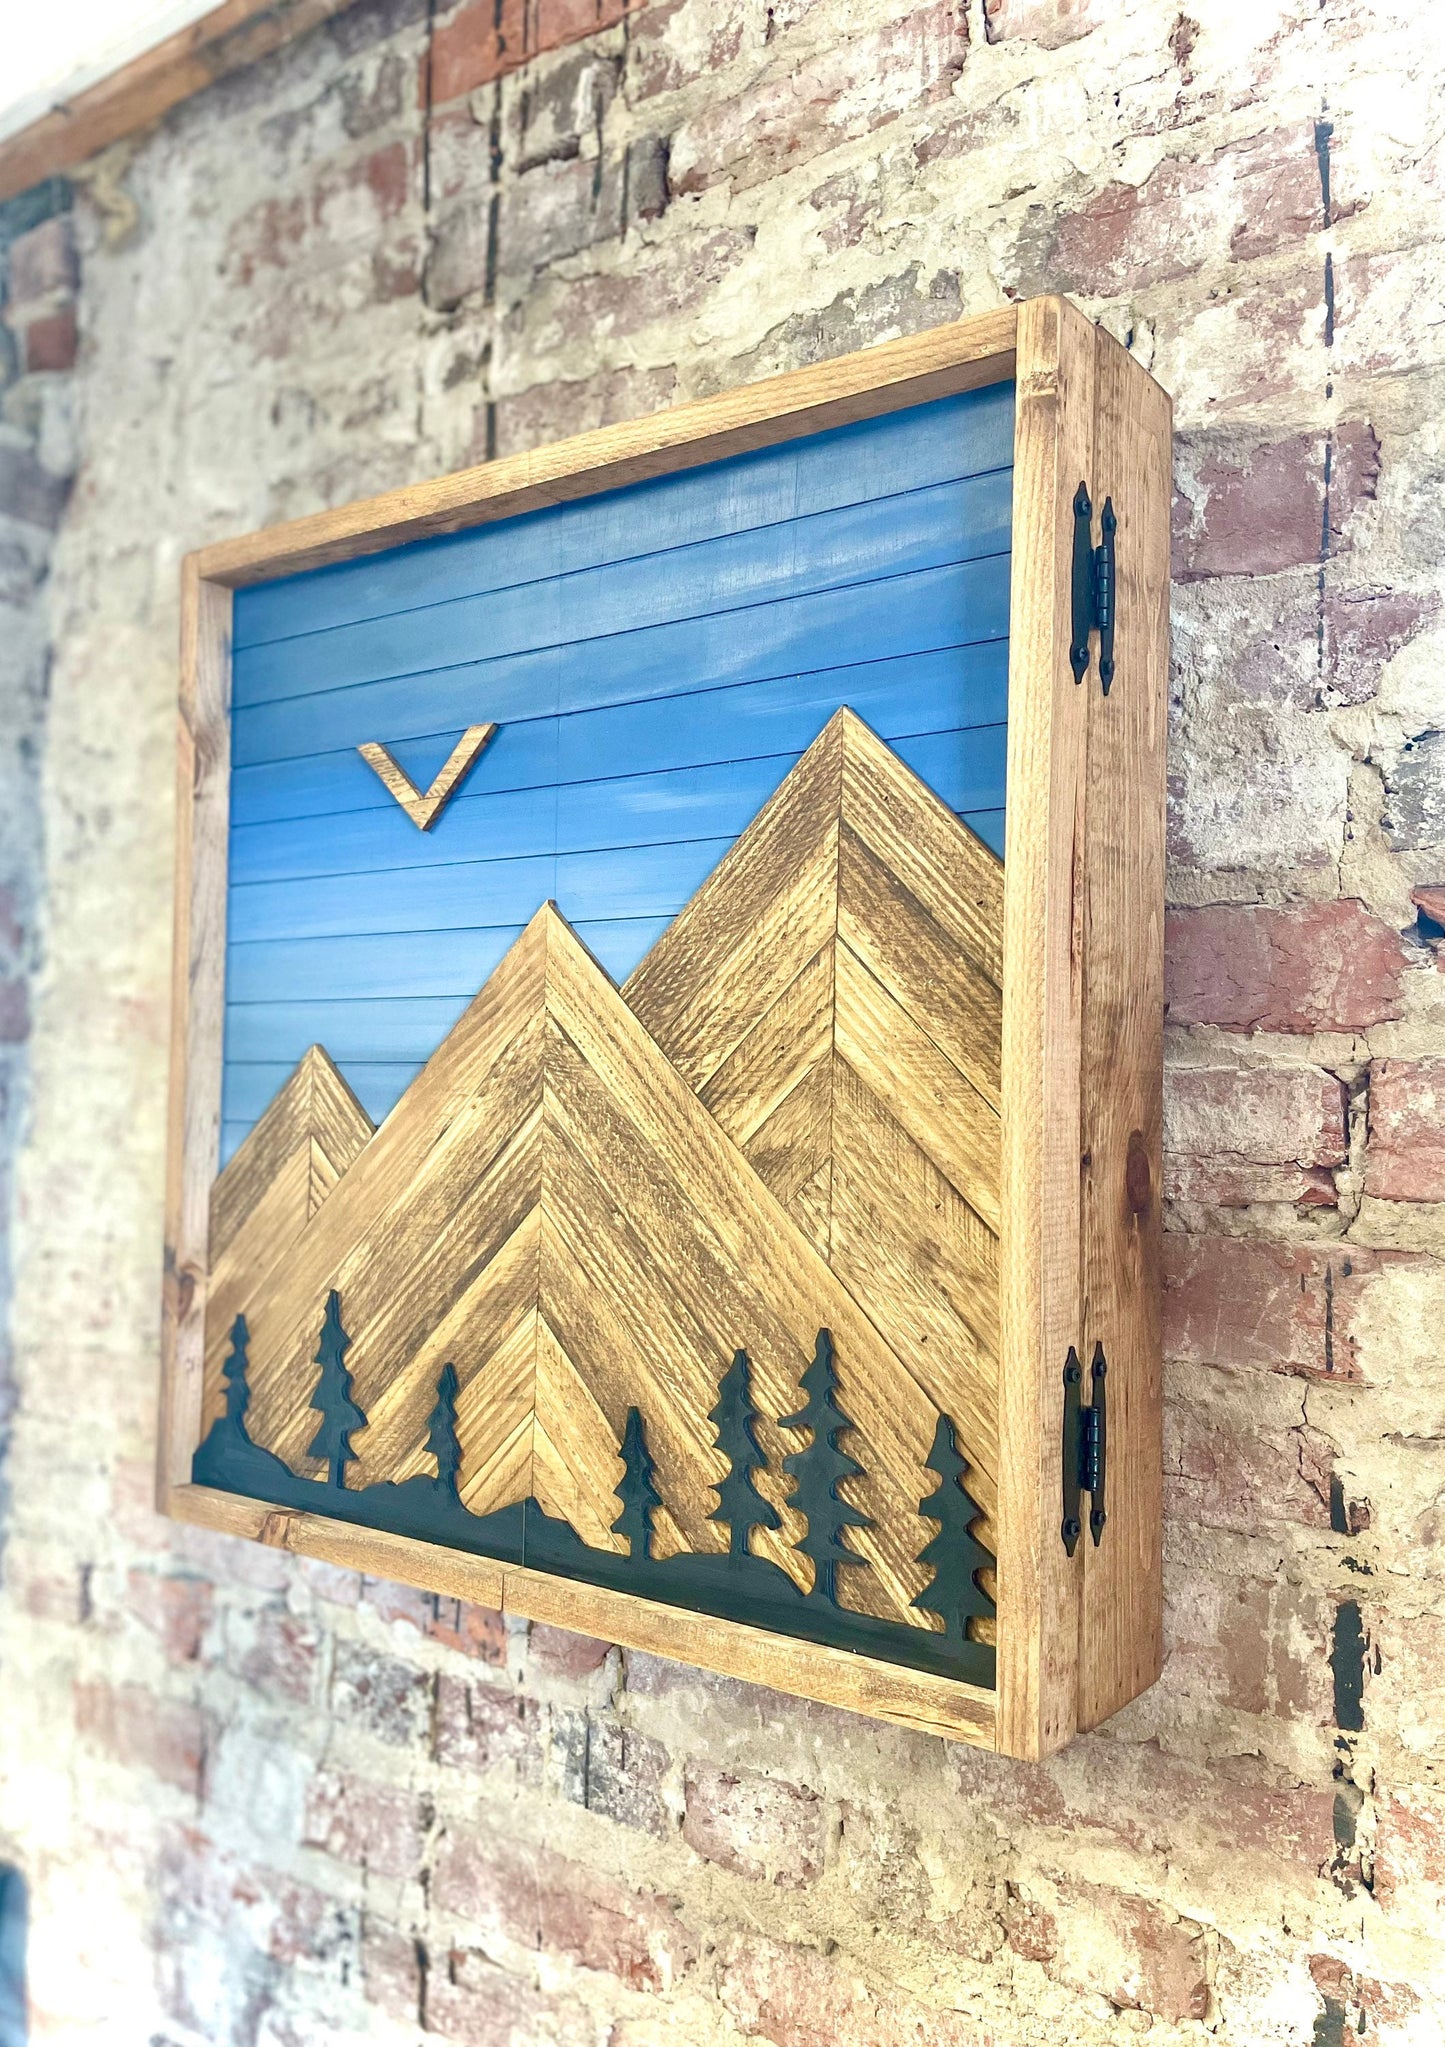 Rustic Dartboard Cabinet - Rustic Blue Sky w/ Trees Mountain Art  24”x24” - Rustic Cabinet - Game Room / Man Cave Art - Wall Decor - Cabinet